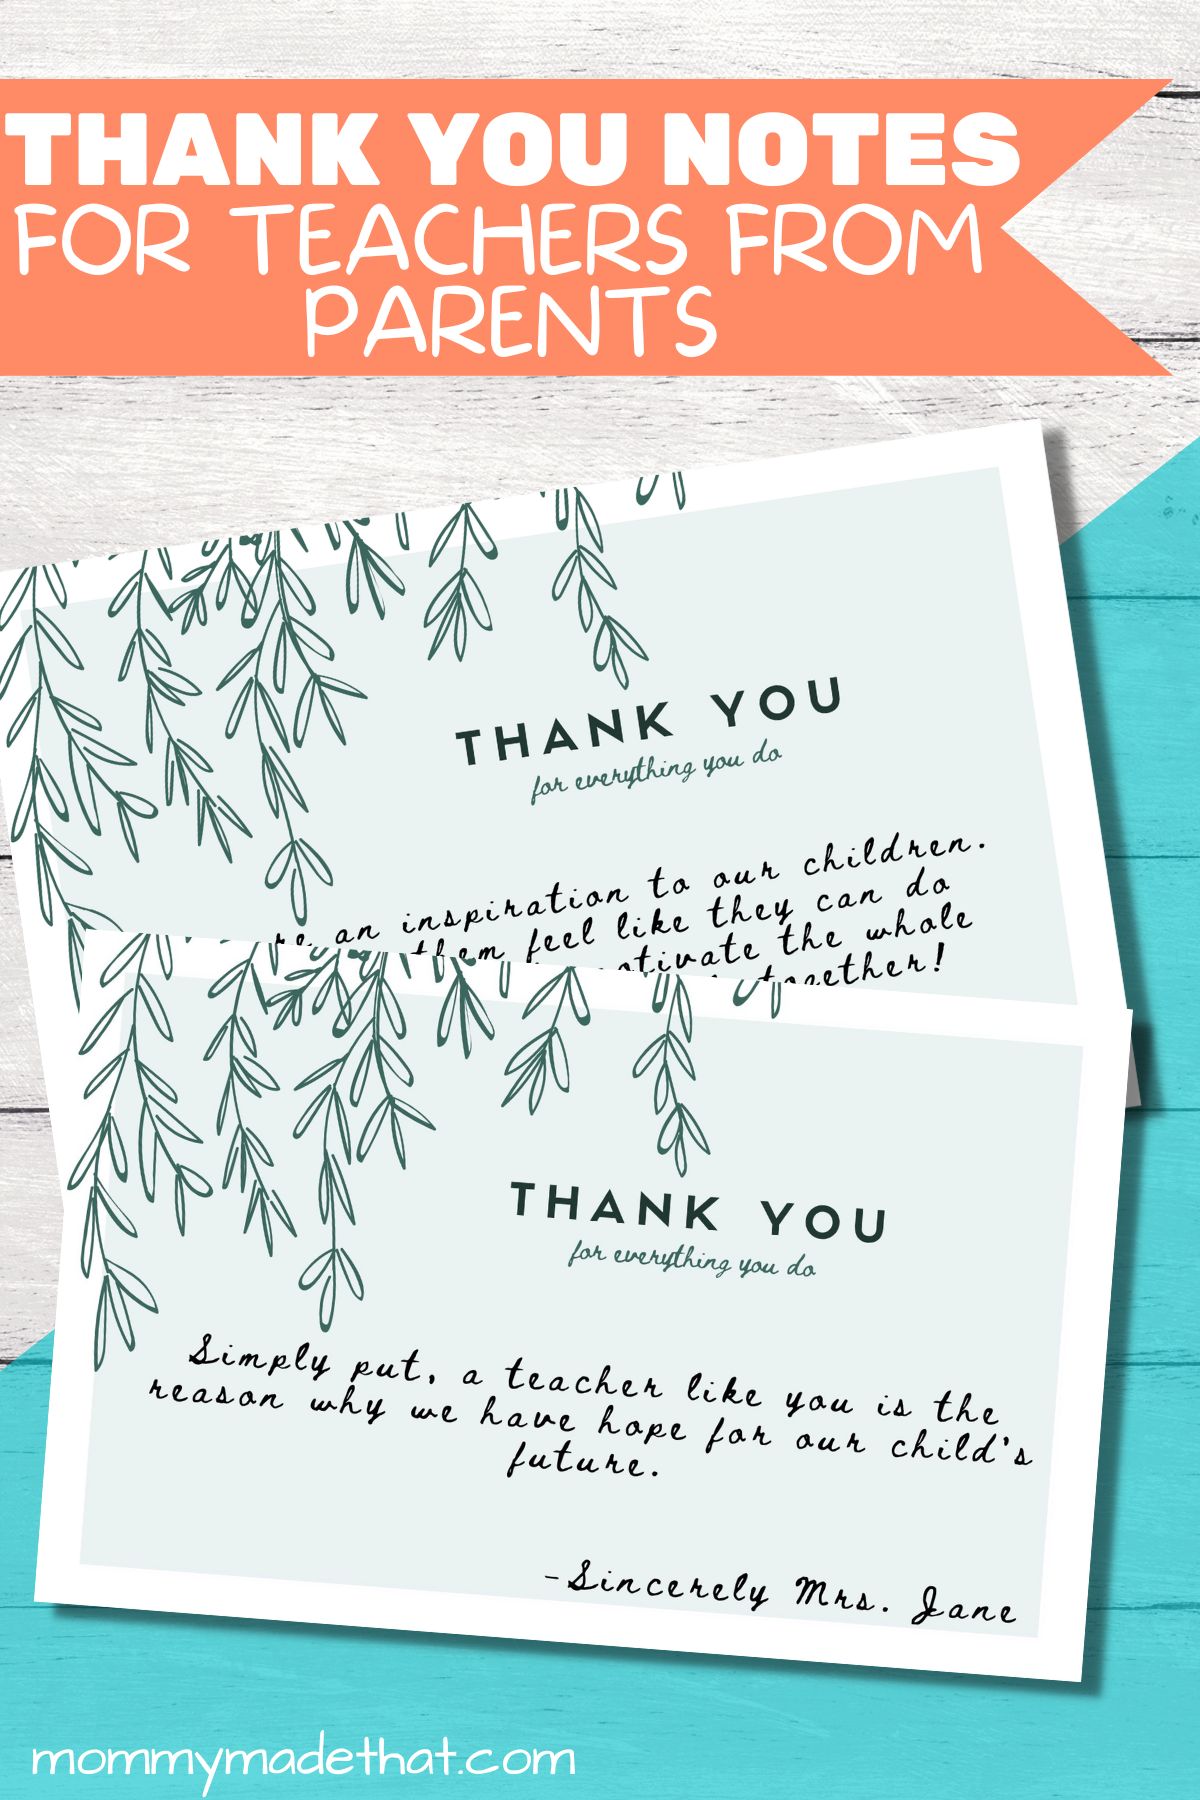 Thank you notes to teachers from parents